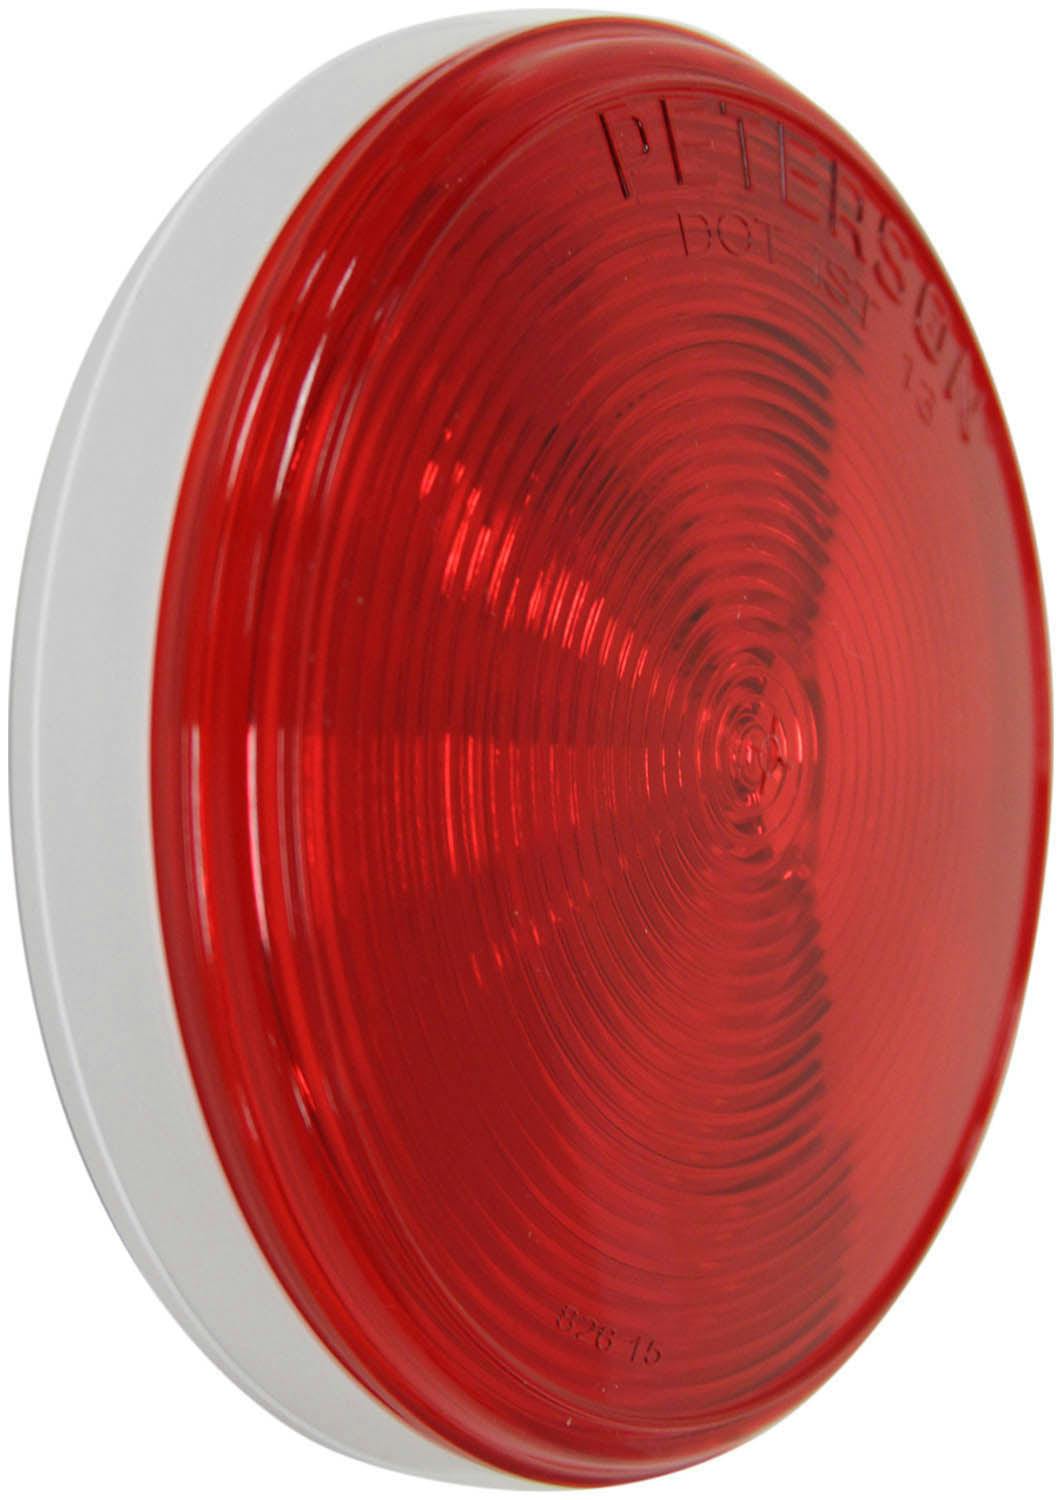 LED Stop/Turn/Tail, Round, Single Diode, Grommet-Mount, 4", red, bulk pack (Pack of 50)